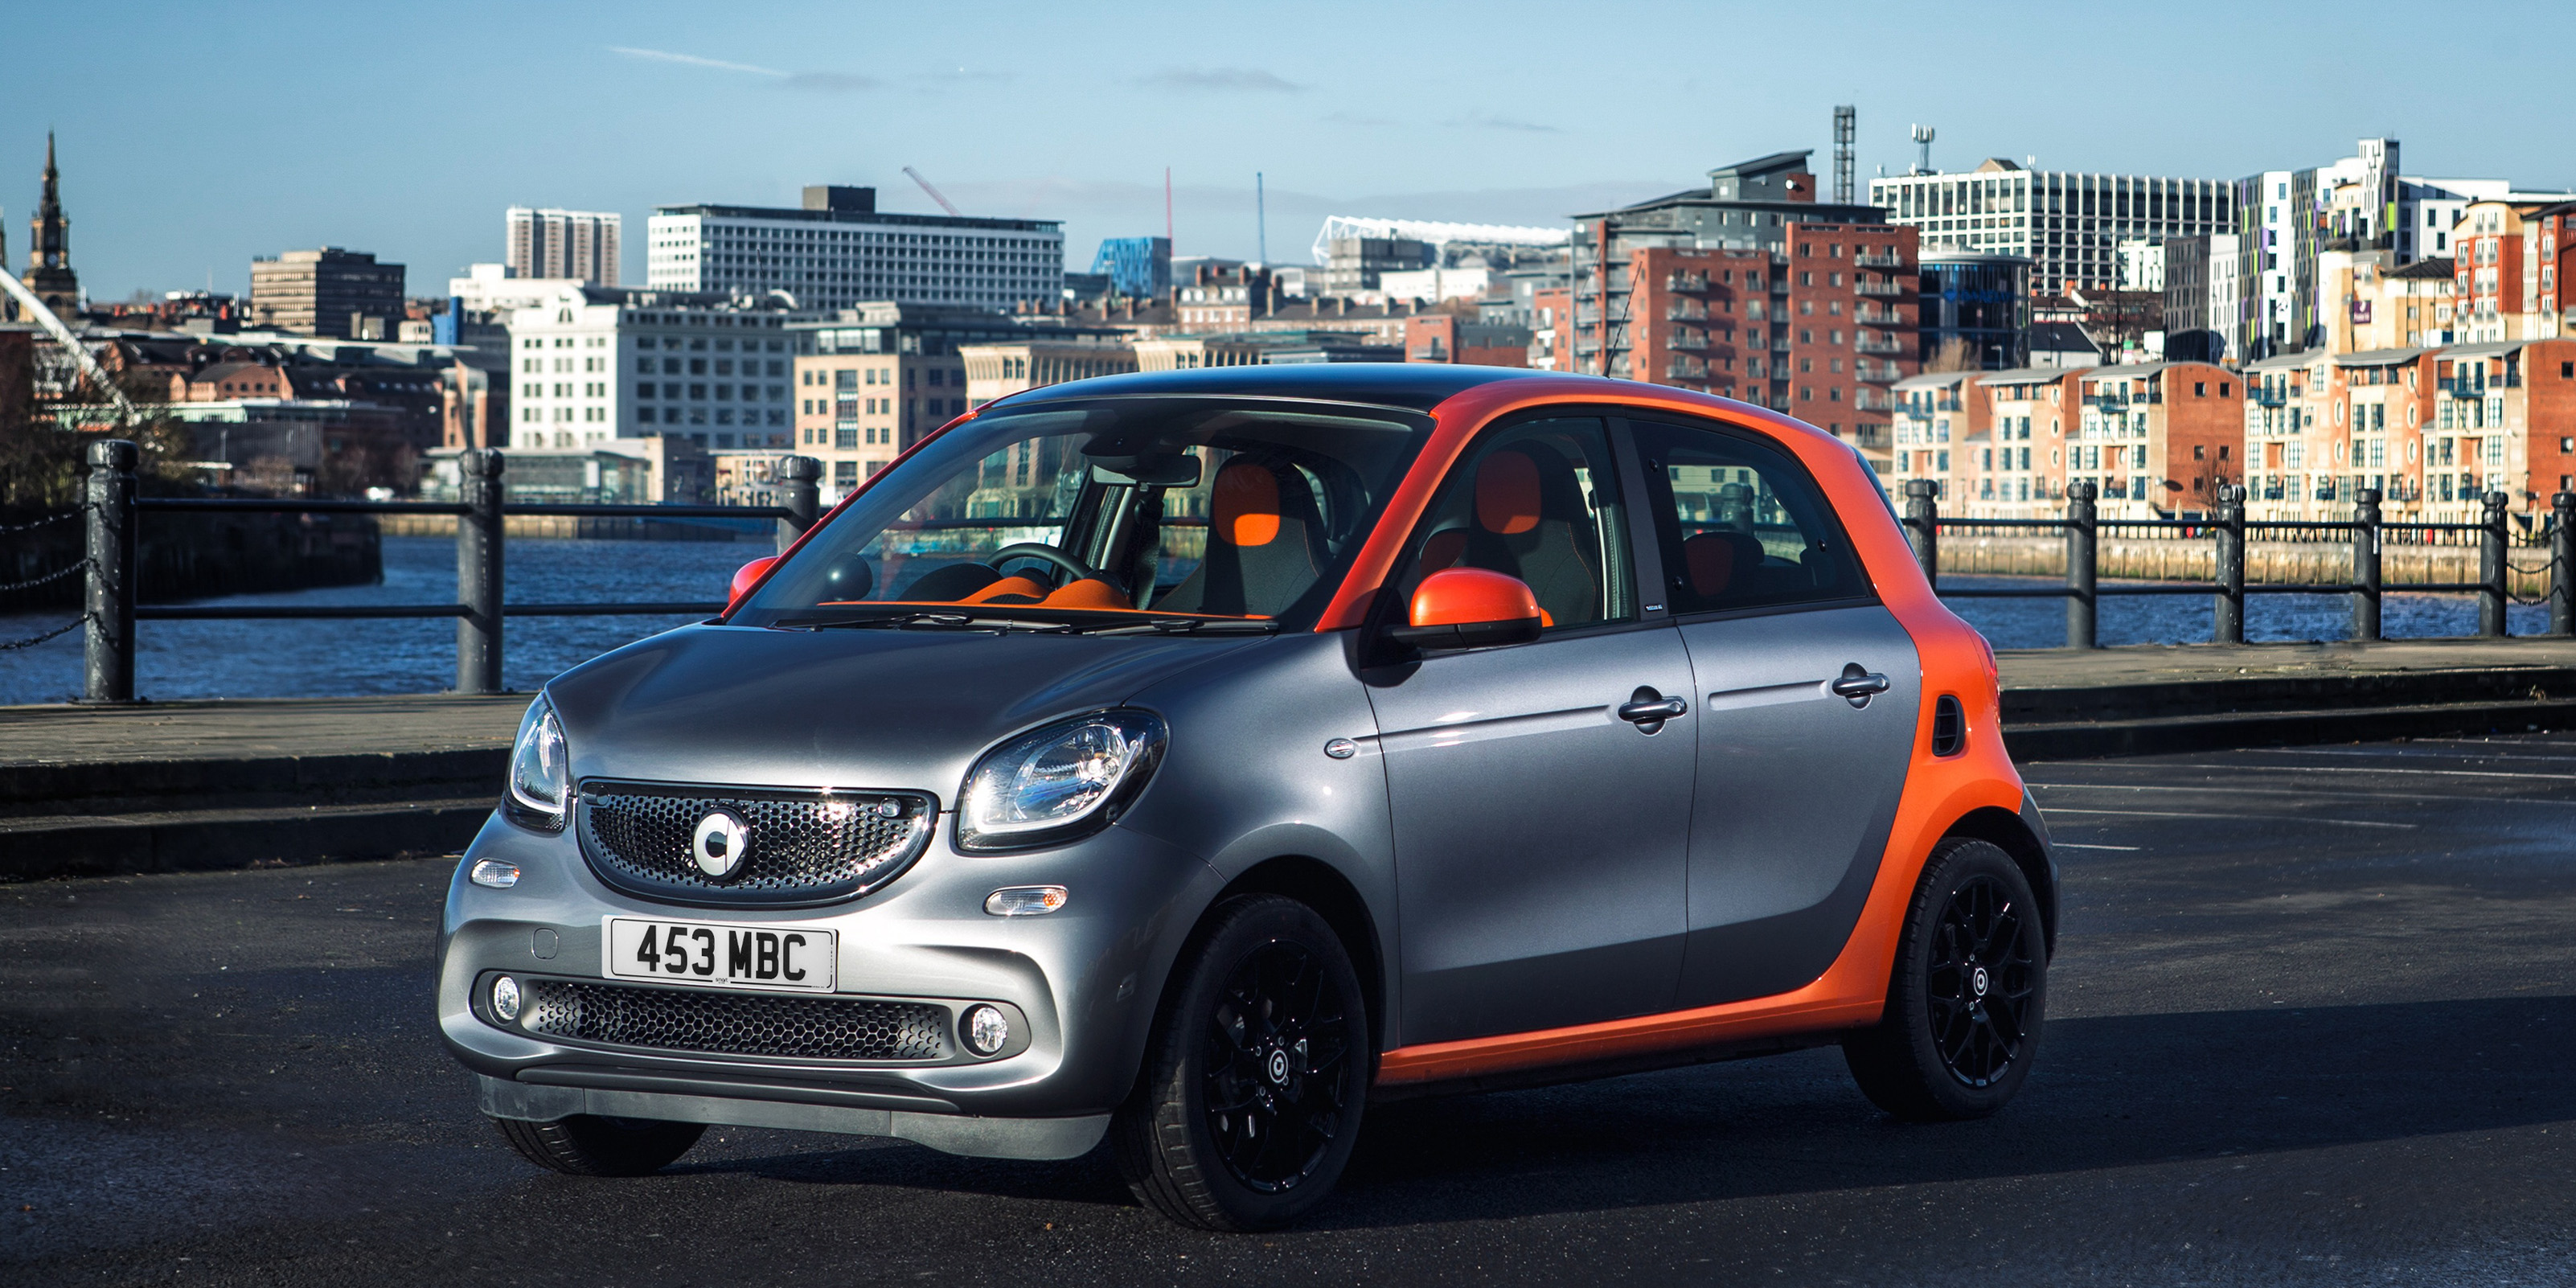 forfour